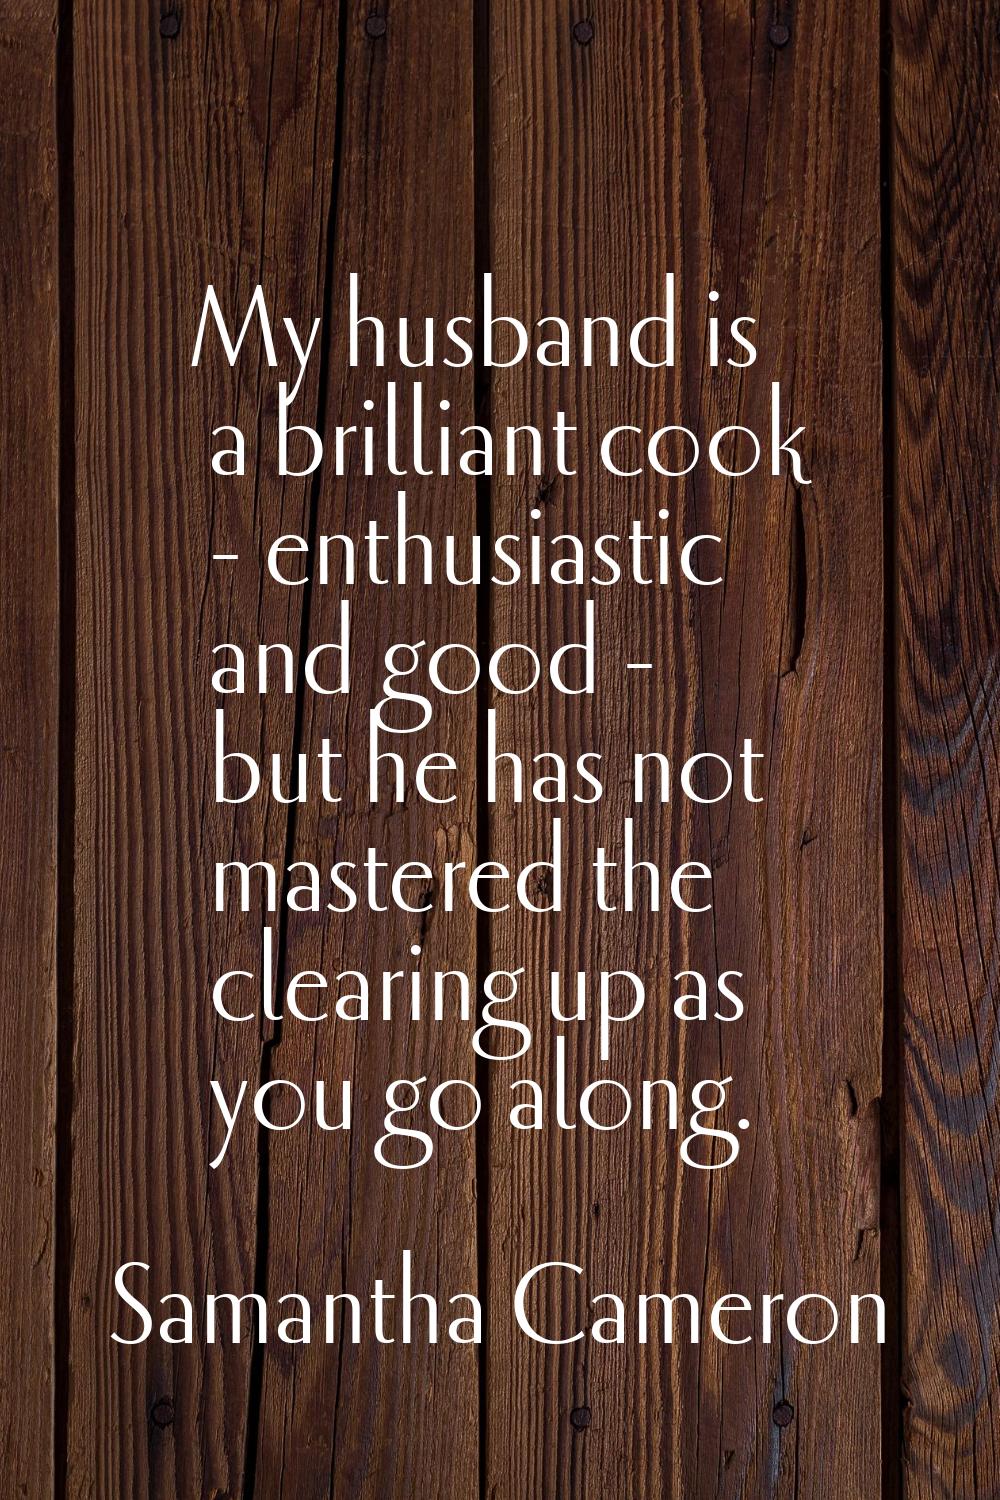 My husband is a brilliant cook - enthusiastic and good - but he has not mastered the clearing up as